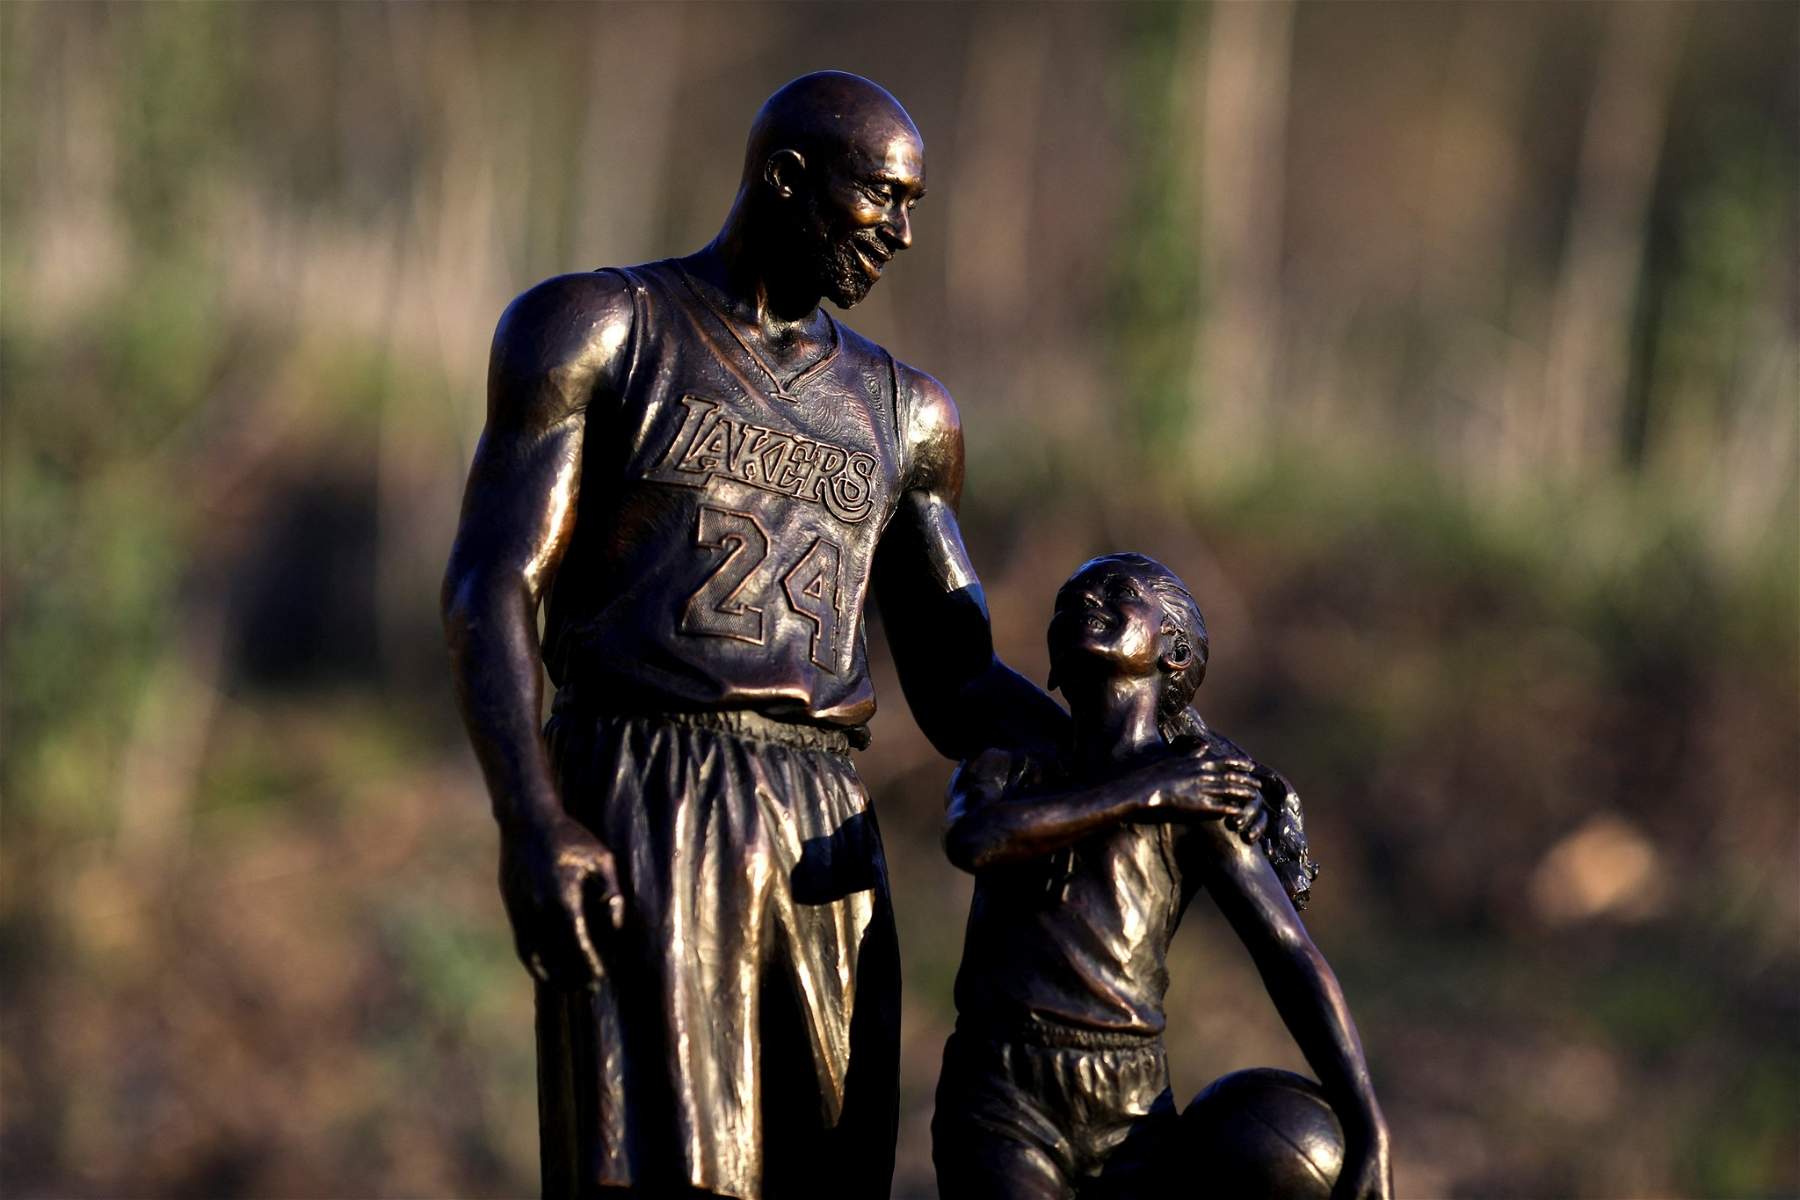 Los Angeles, installed a statue for Kobe Bryant at the site where he lost his life